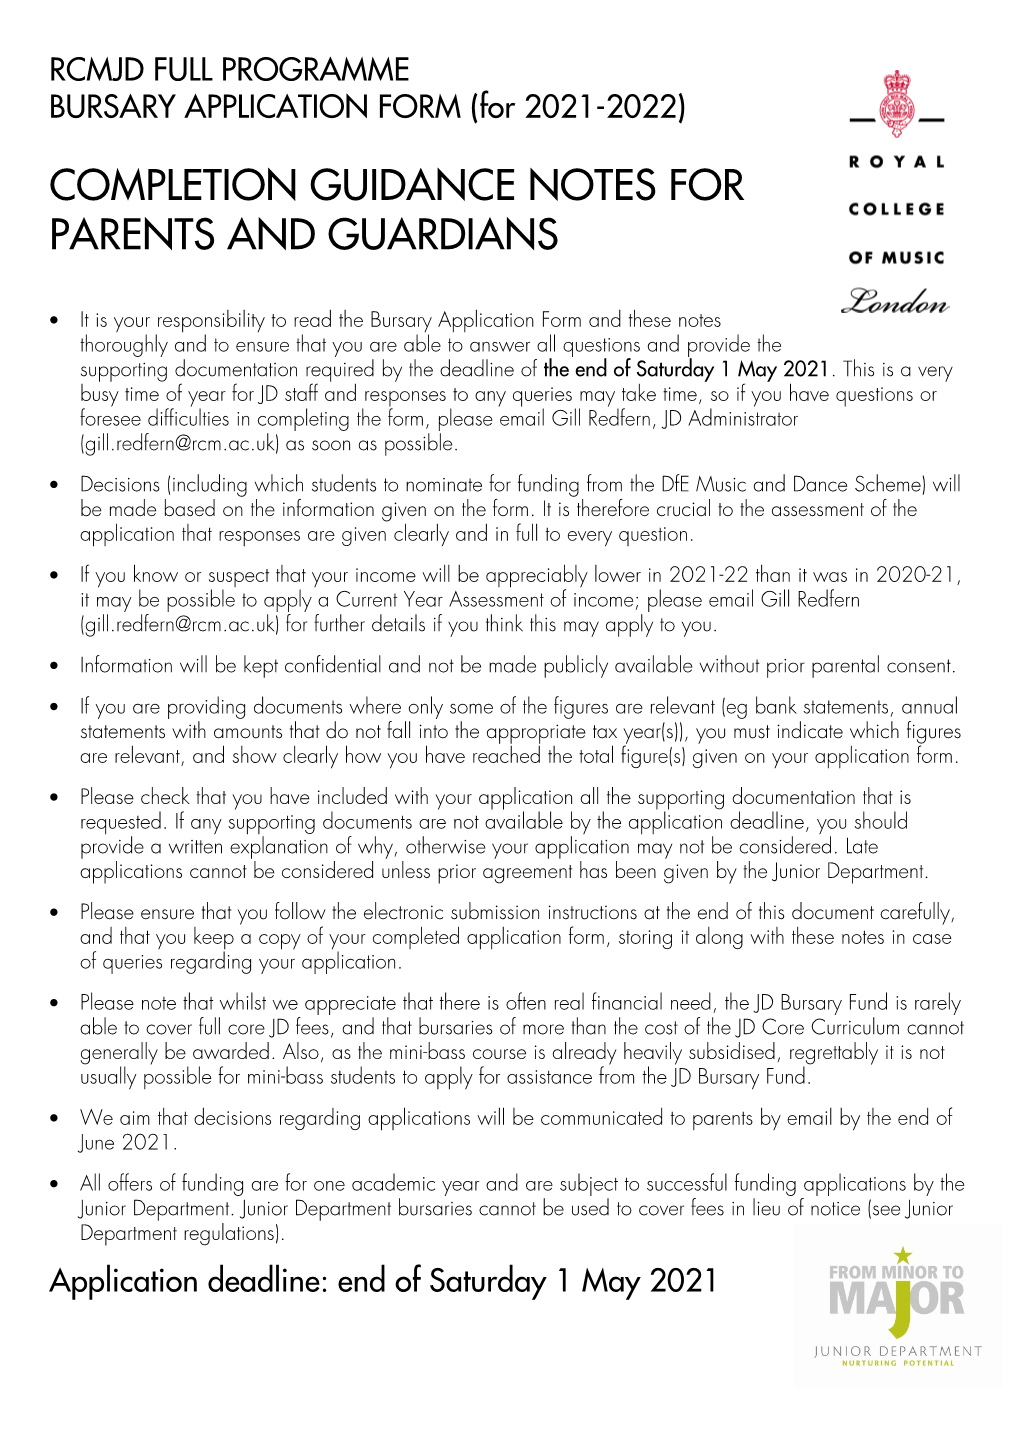 Completion Guidance Notes for Parents and Guardians